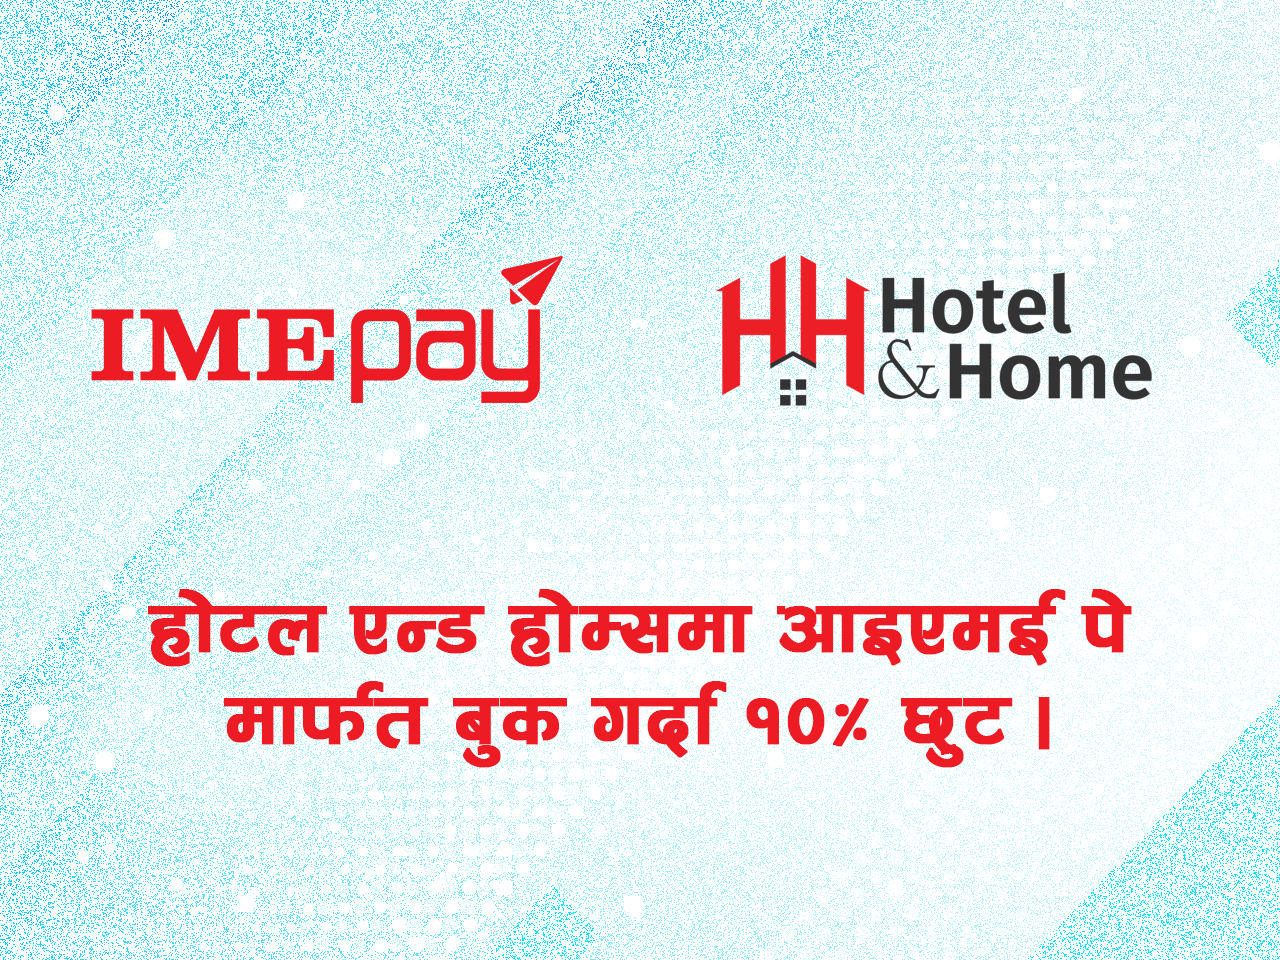 Discount on payment through IME Pay at Hotel & Home website checkout